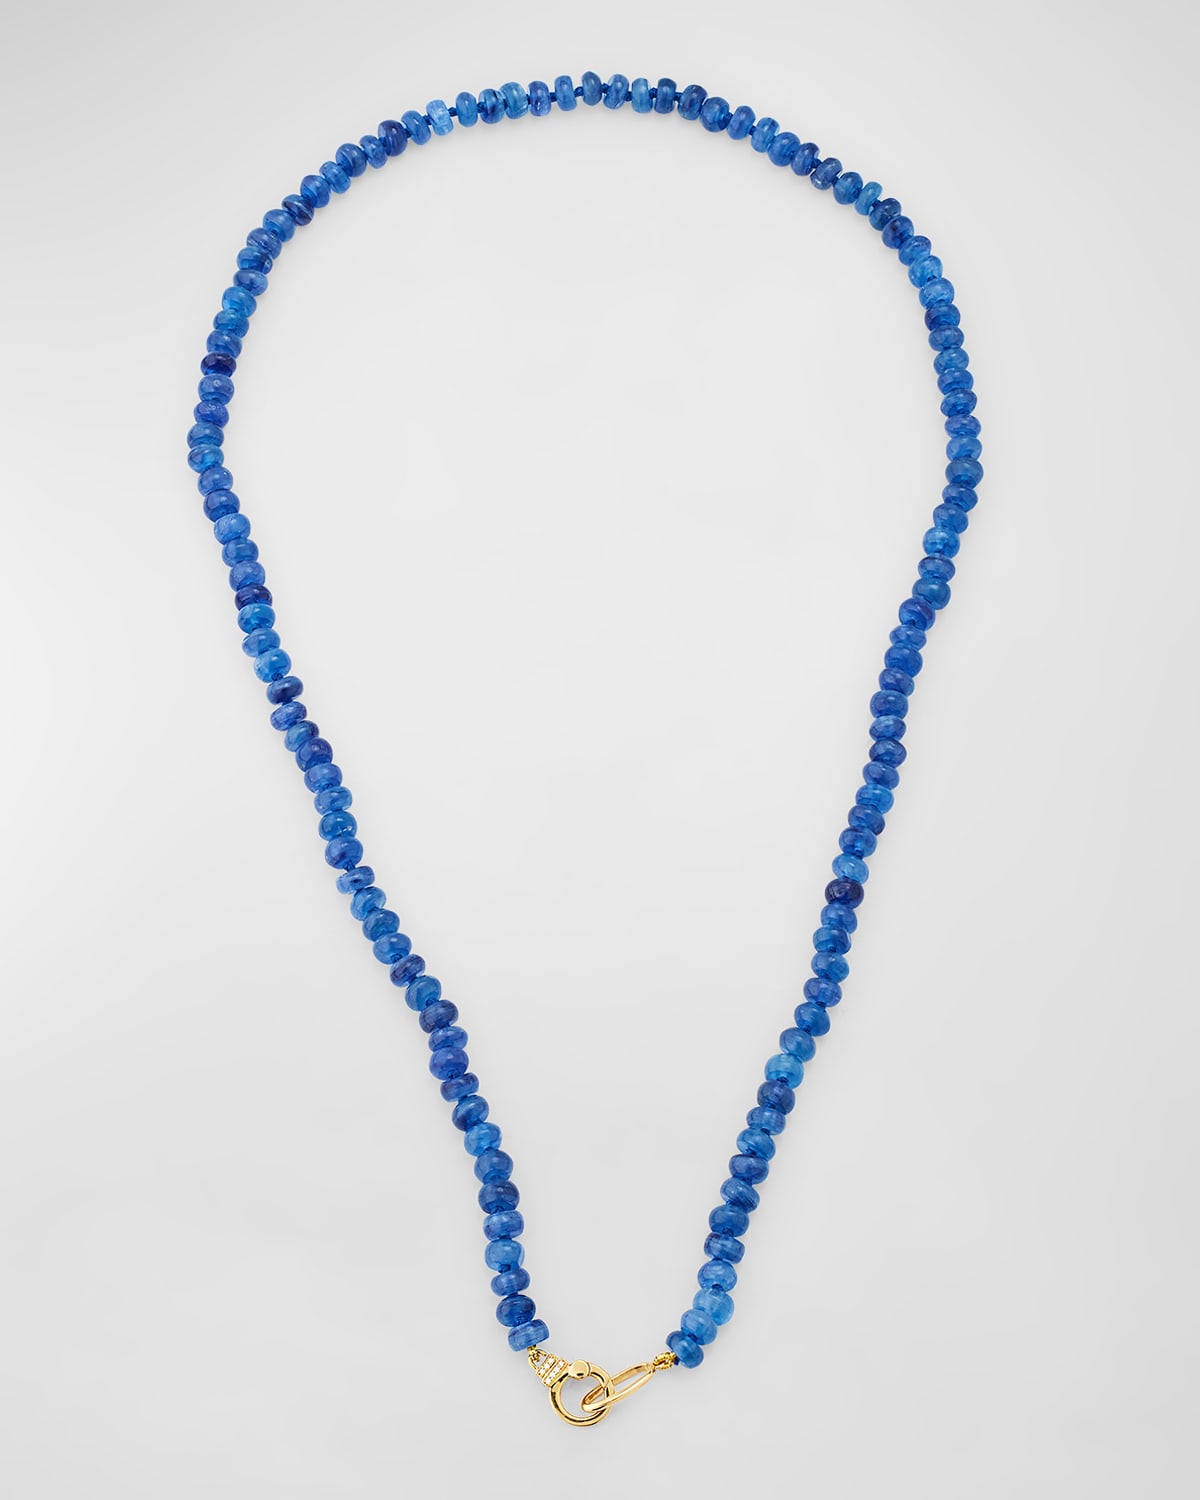 18K Yellow Gold 6mm Kyanite Rondelle Necklace with Small Diamond Clasp, 22"L